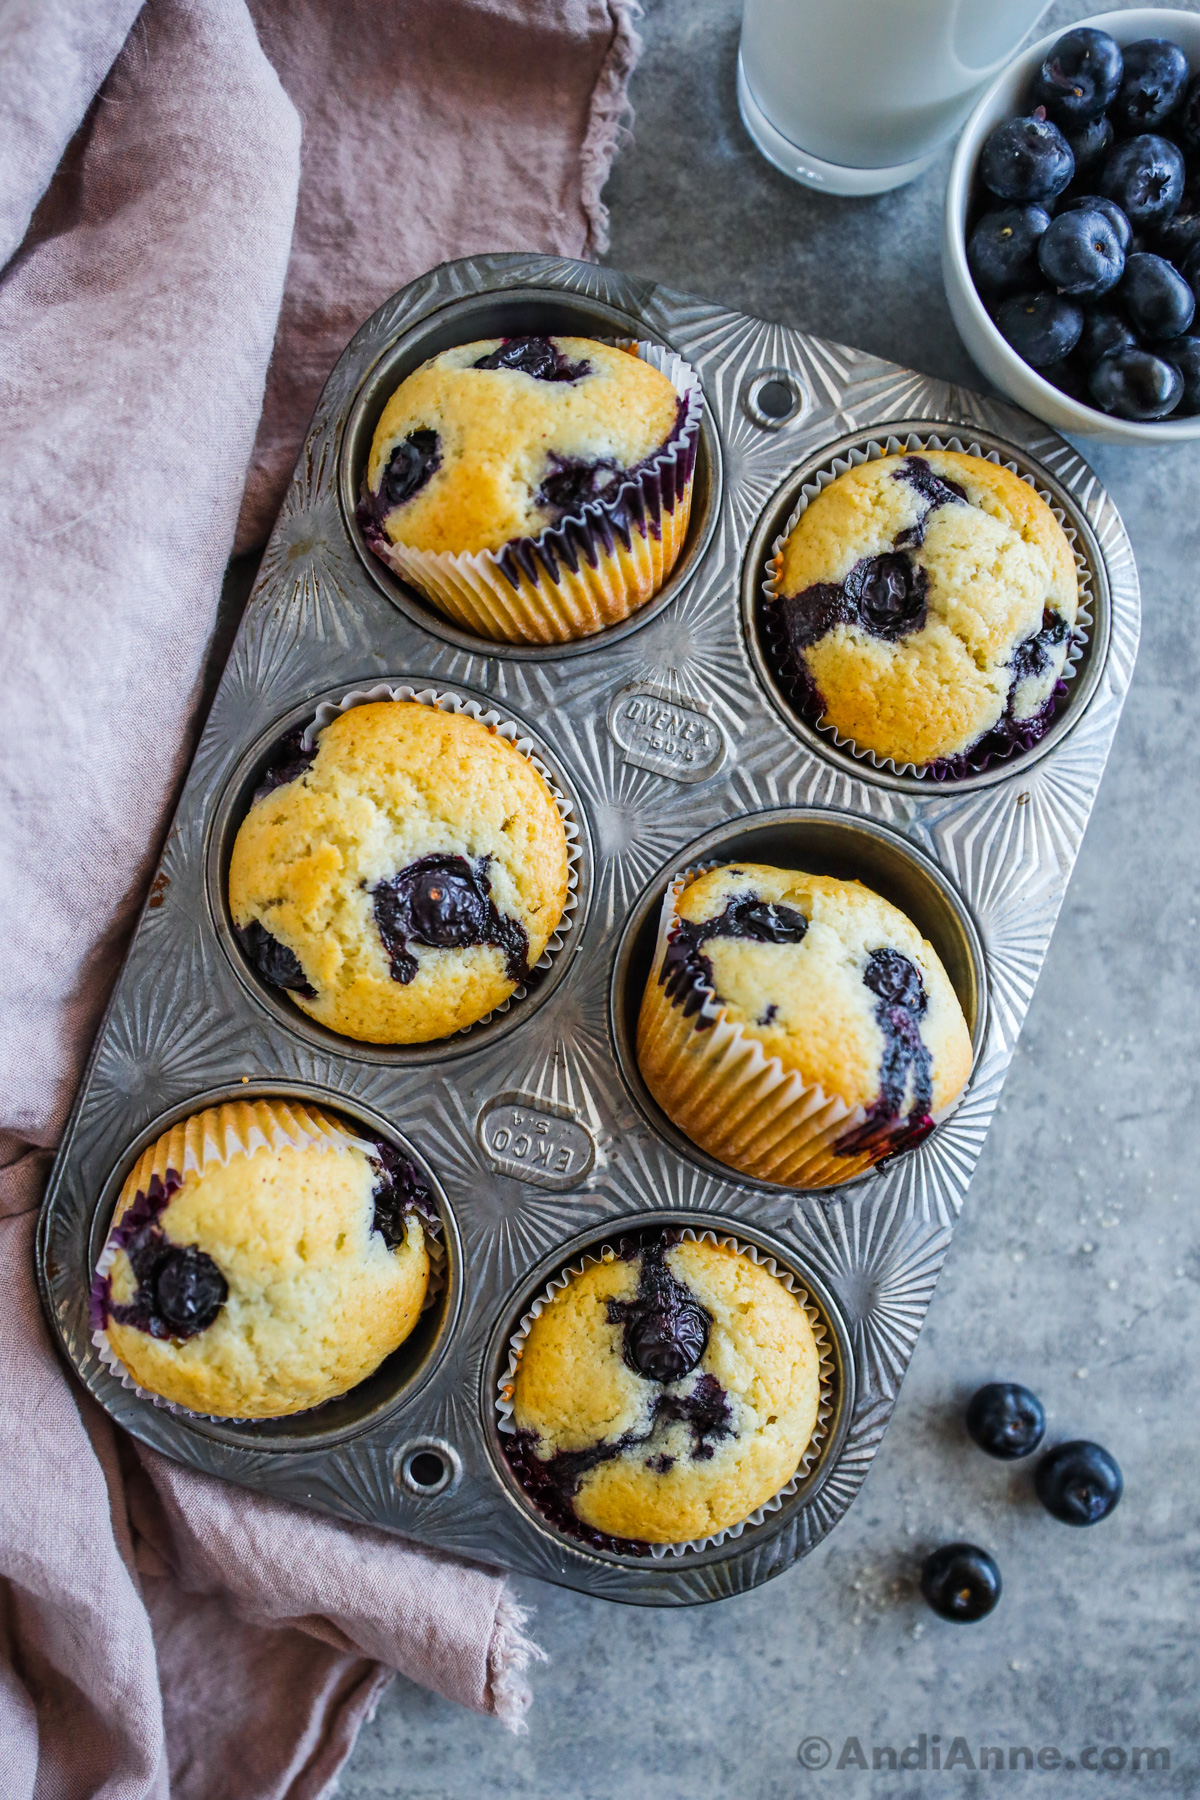 A pan with baked blueberry muffins, a kitchen towel and a bowl of blueberries beside.